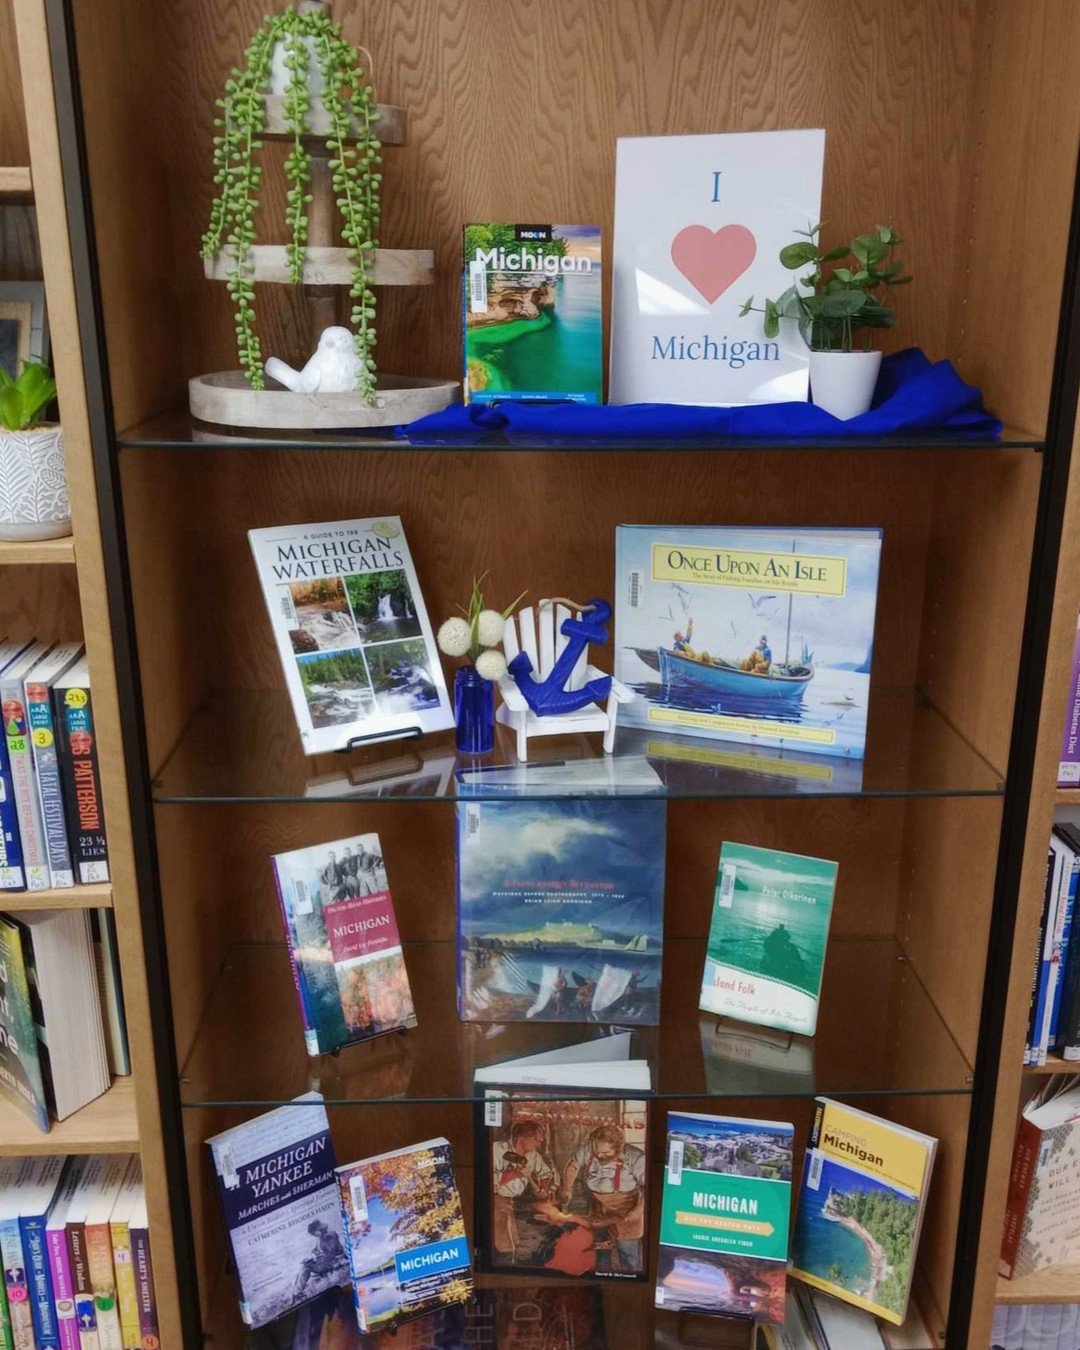 Michigan! ❤️ 
Take a look at these books all about the state we call home. 

#michigan #nonfiction #puremichigan #michiganlibrary #michiganlibraries #librariesofmichigan #library #libraries #books #book #shelfie #bookdisplay #librarybooks #read #read